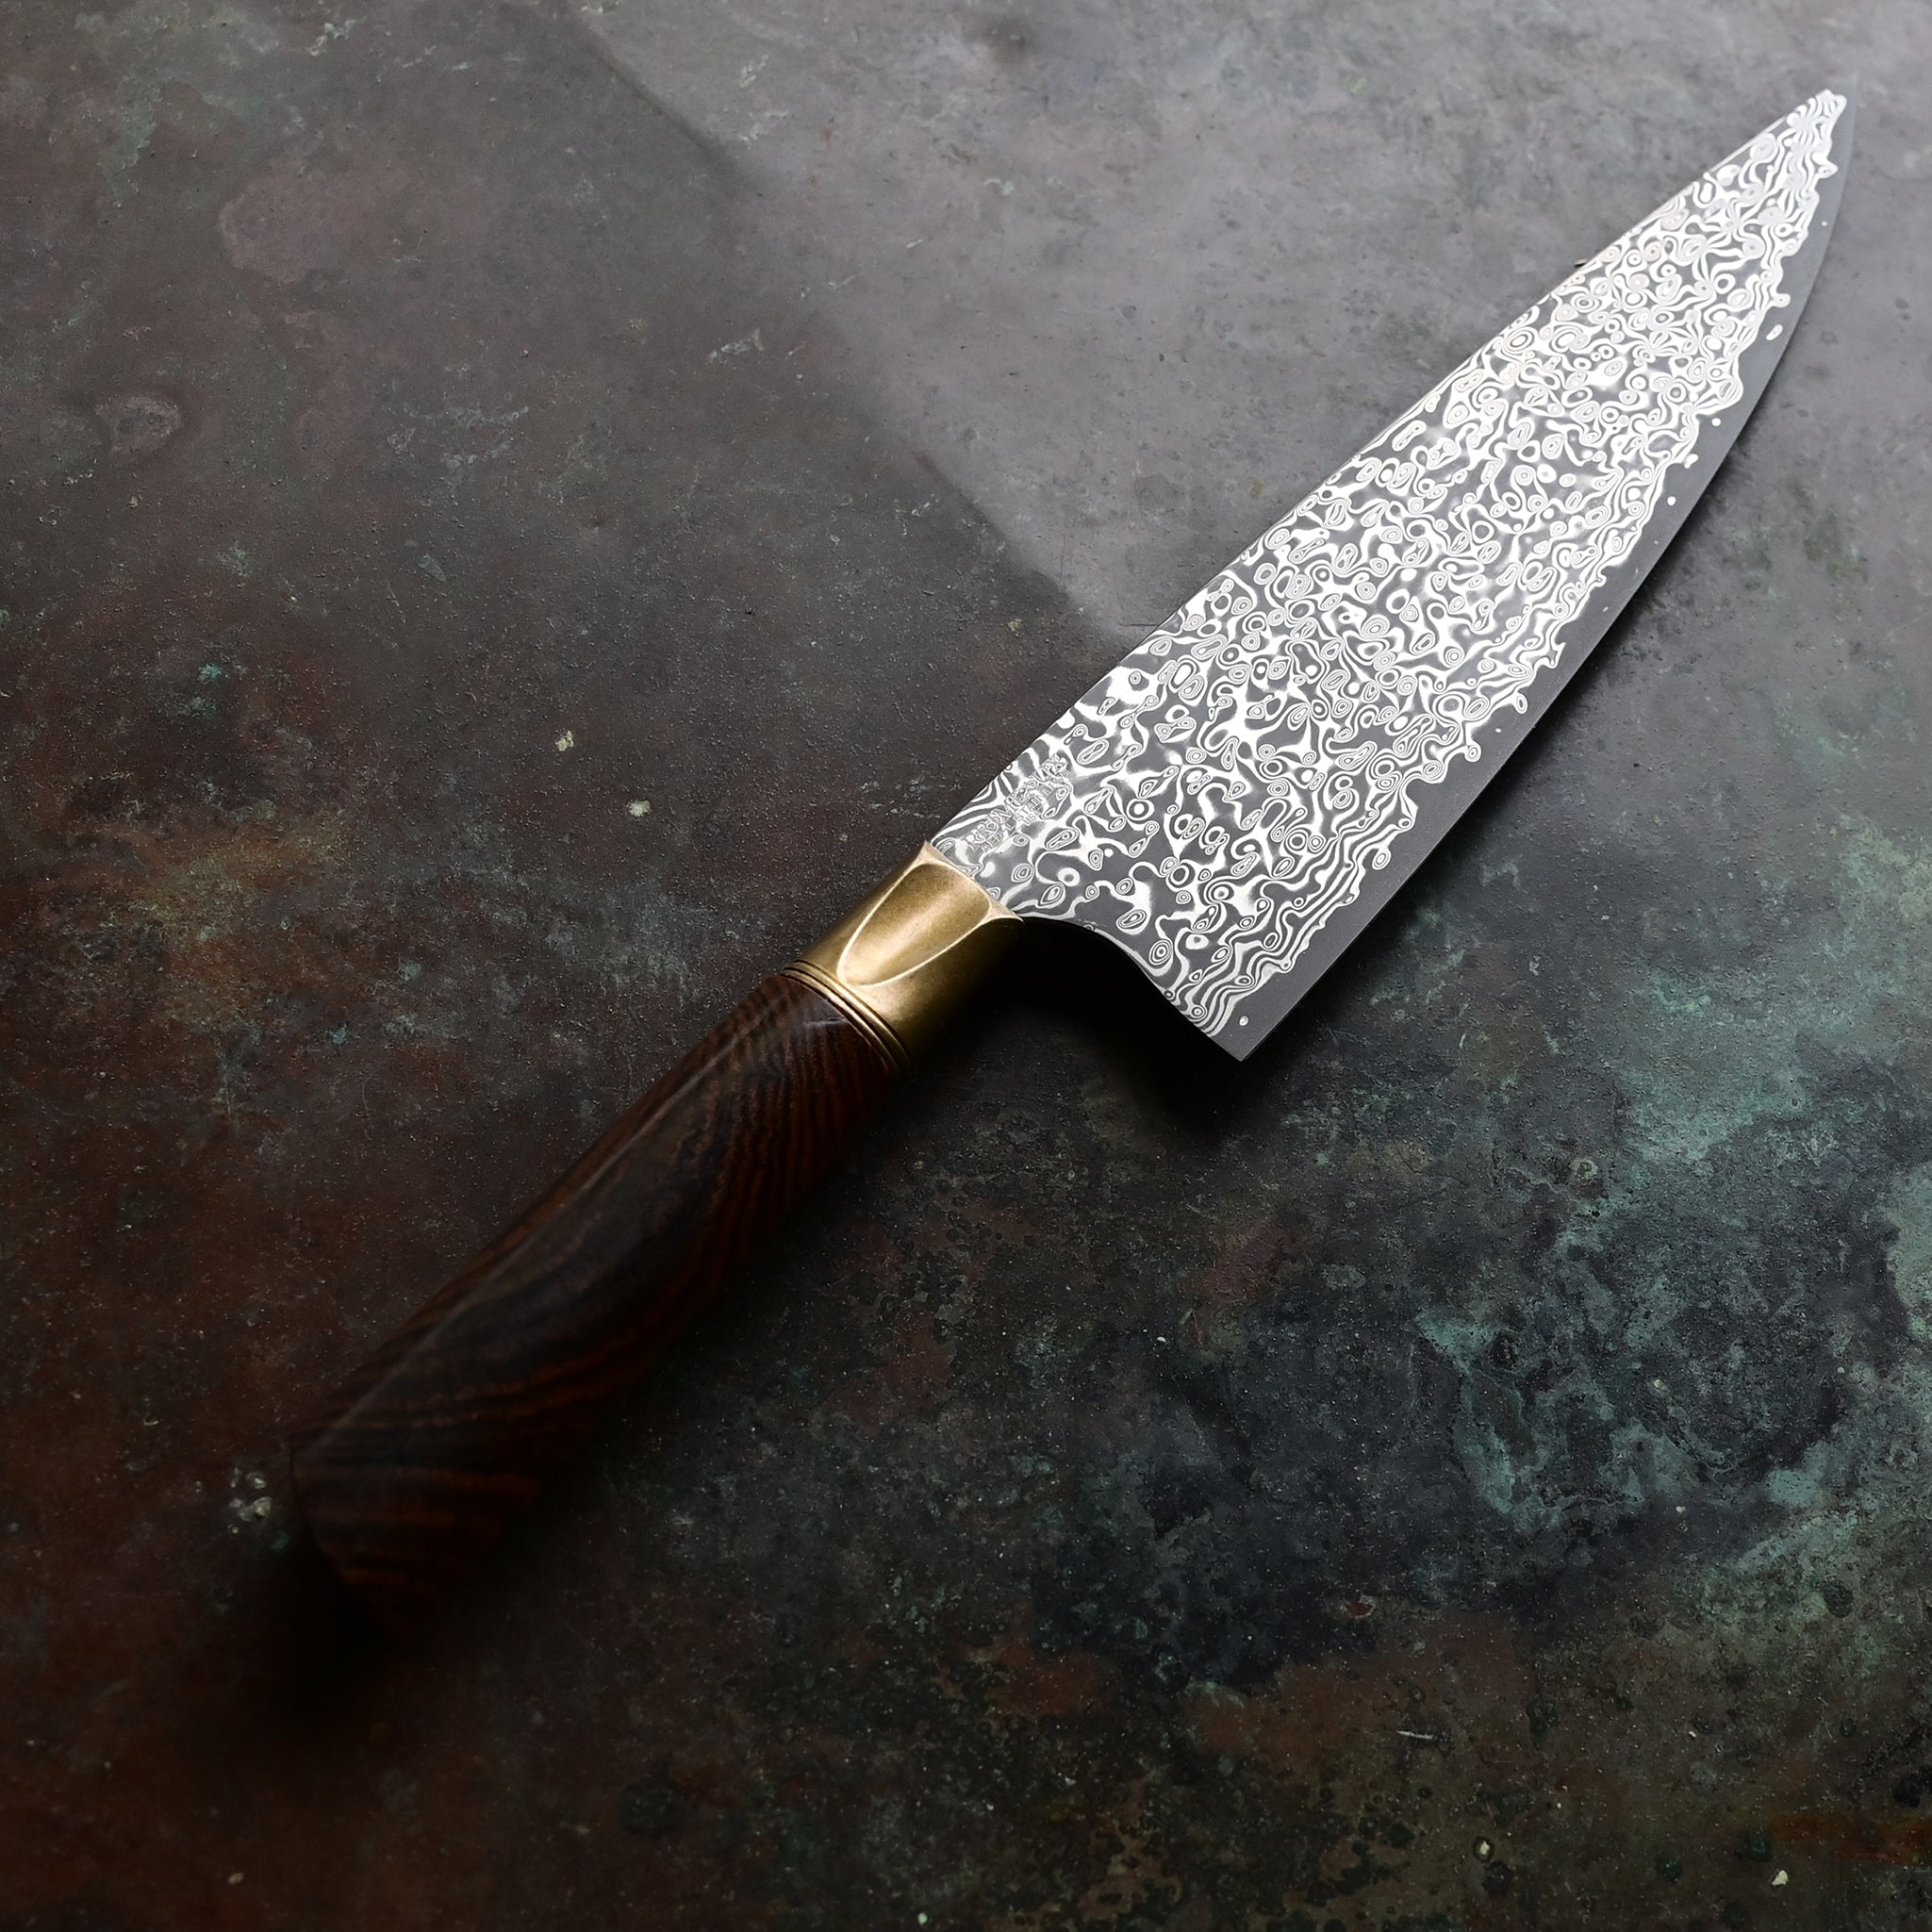 A stunning chef knife with a VG10 stainless Damascus zenith blade, aged bronze bolster, and a beautiful cross-cut Bocote wood handle displaying rings and patterns in shades of brown and tan, hand-forged by John Phillips